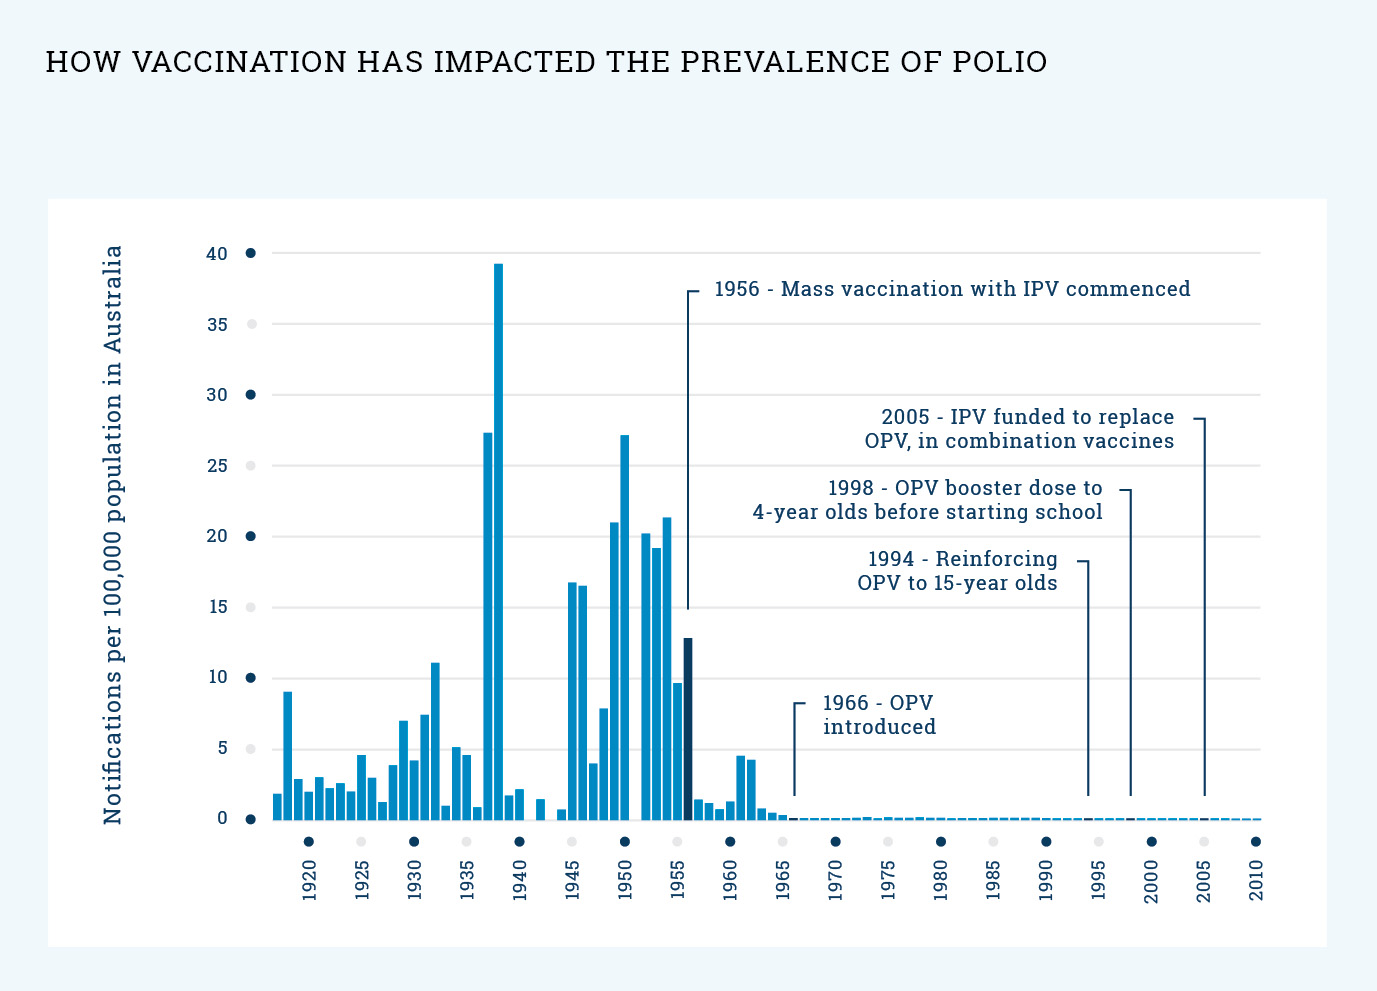 gRAPH: What impact has the vaccination had on the prevalence of polio?